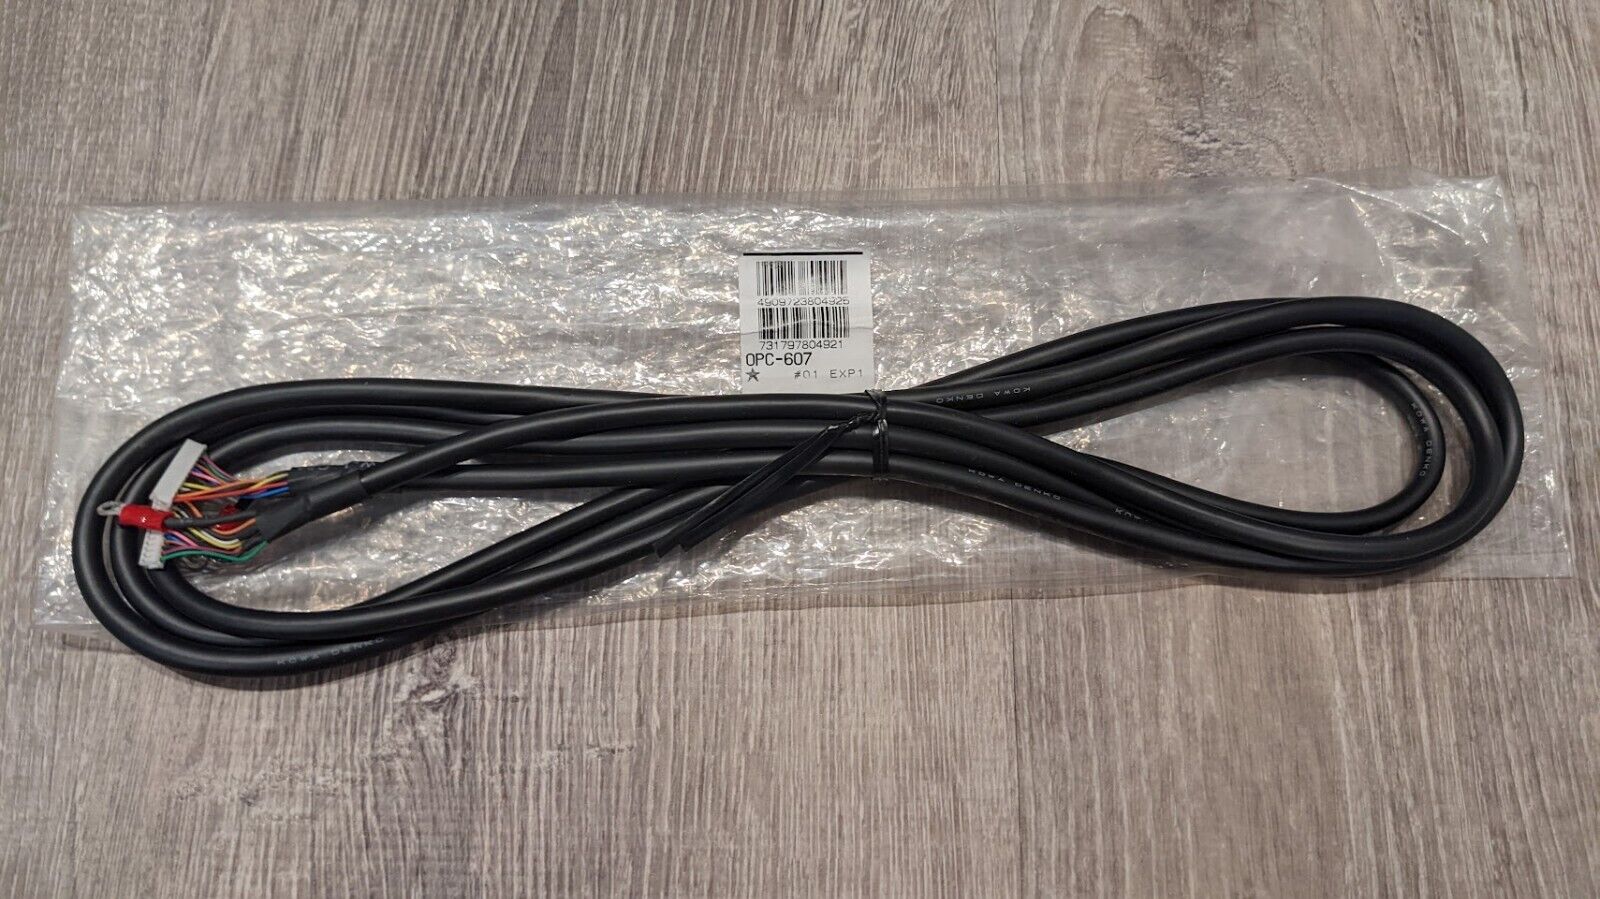 New Icom Opc-607 Remote Head Separation Cable 9.8 Feet Usa Seller